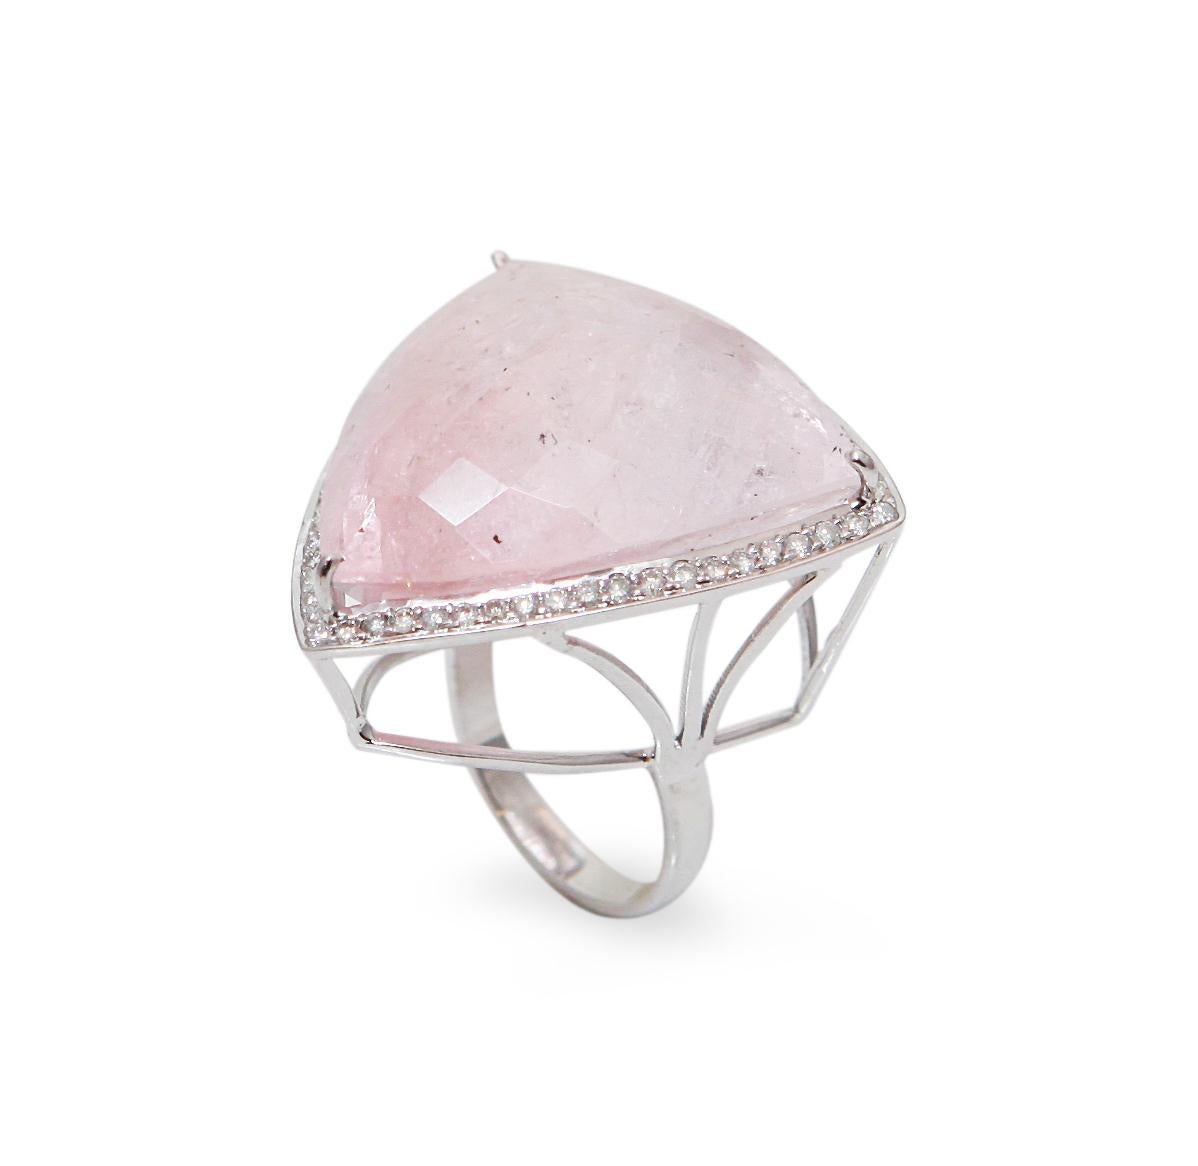 Important and rare cocktail ring presenting a central Troidia morganite entirely set with diamonds.

18K white gold, 750 / 1000th

Morganite weight: 60 carats

Deep pink color.

Dimensions: 32 X 32mm (1.26 x 1.26 inch) 

Diamonds weight: 0.90